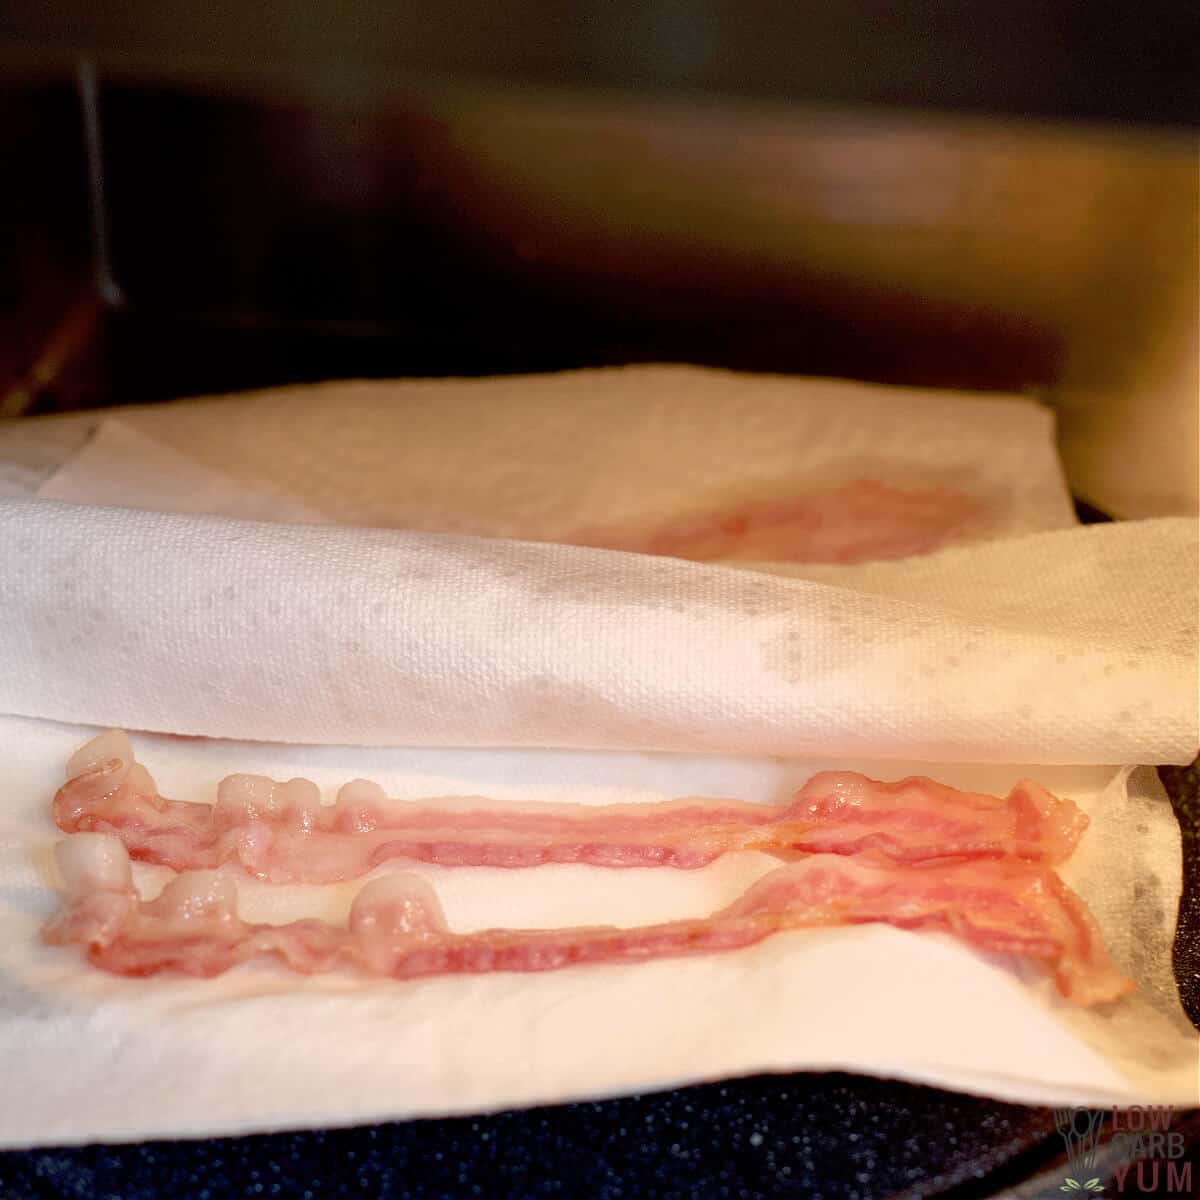 checking on bacon in microwave 30 second interval